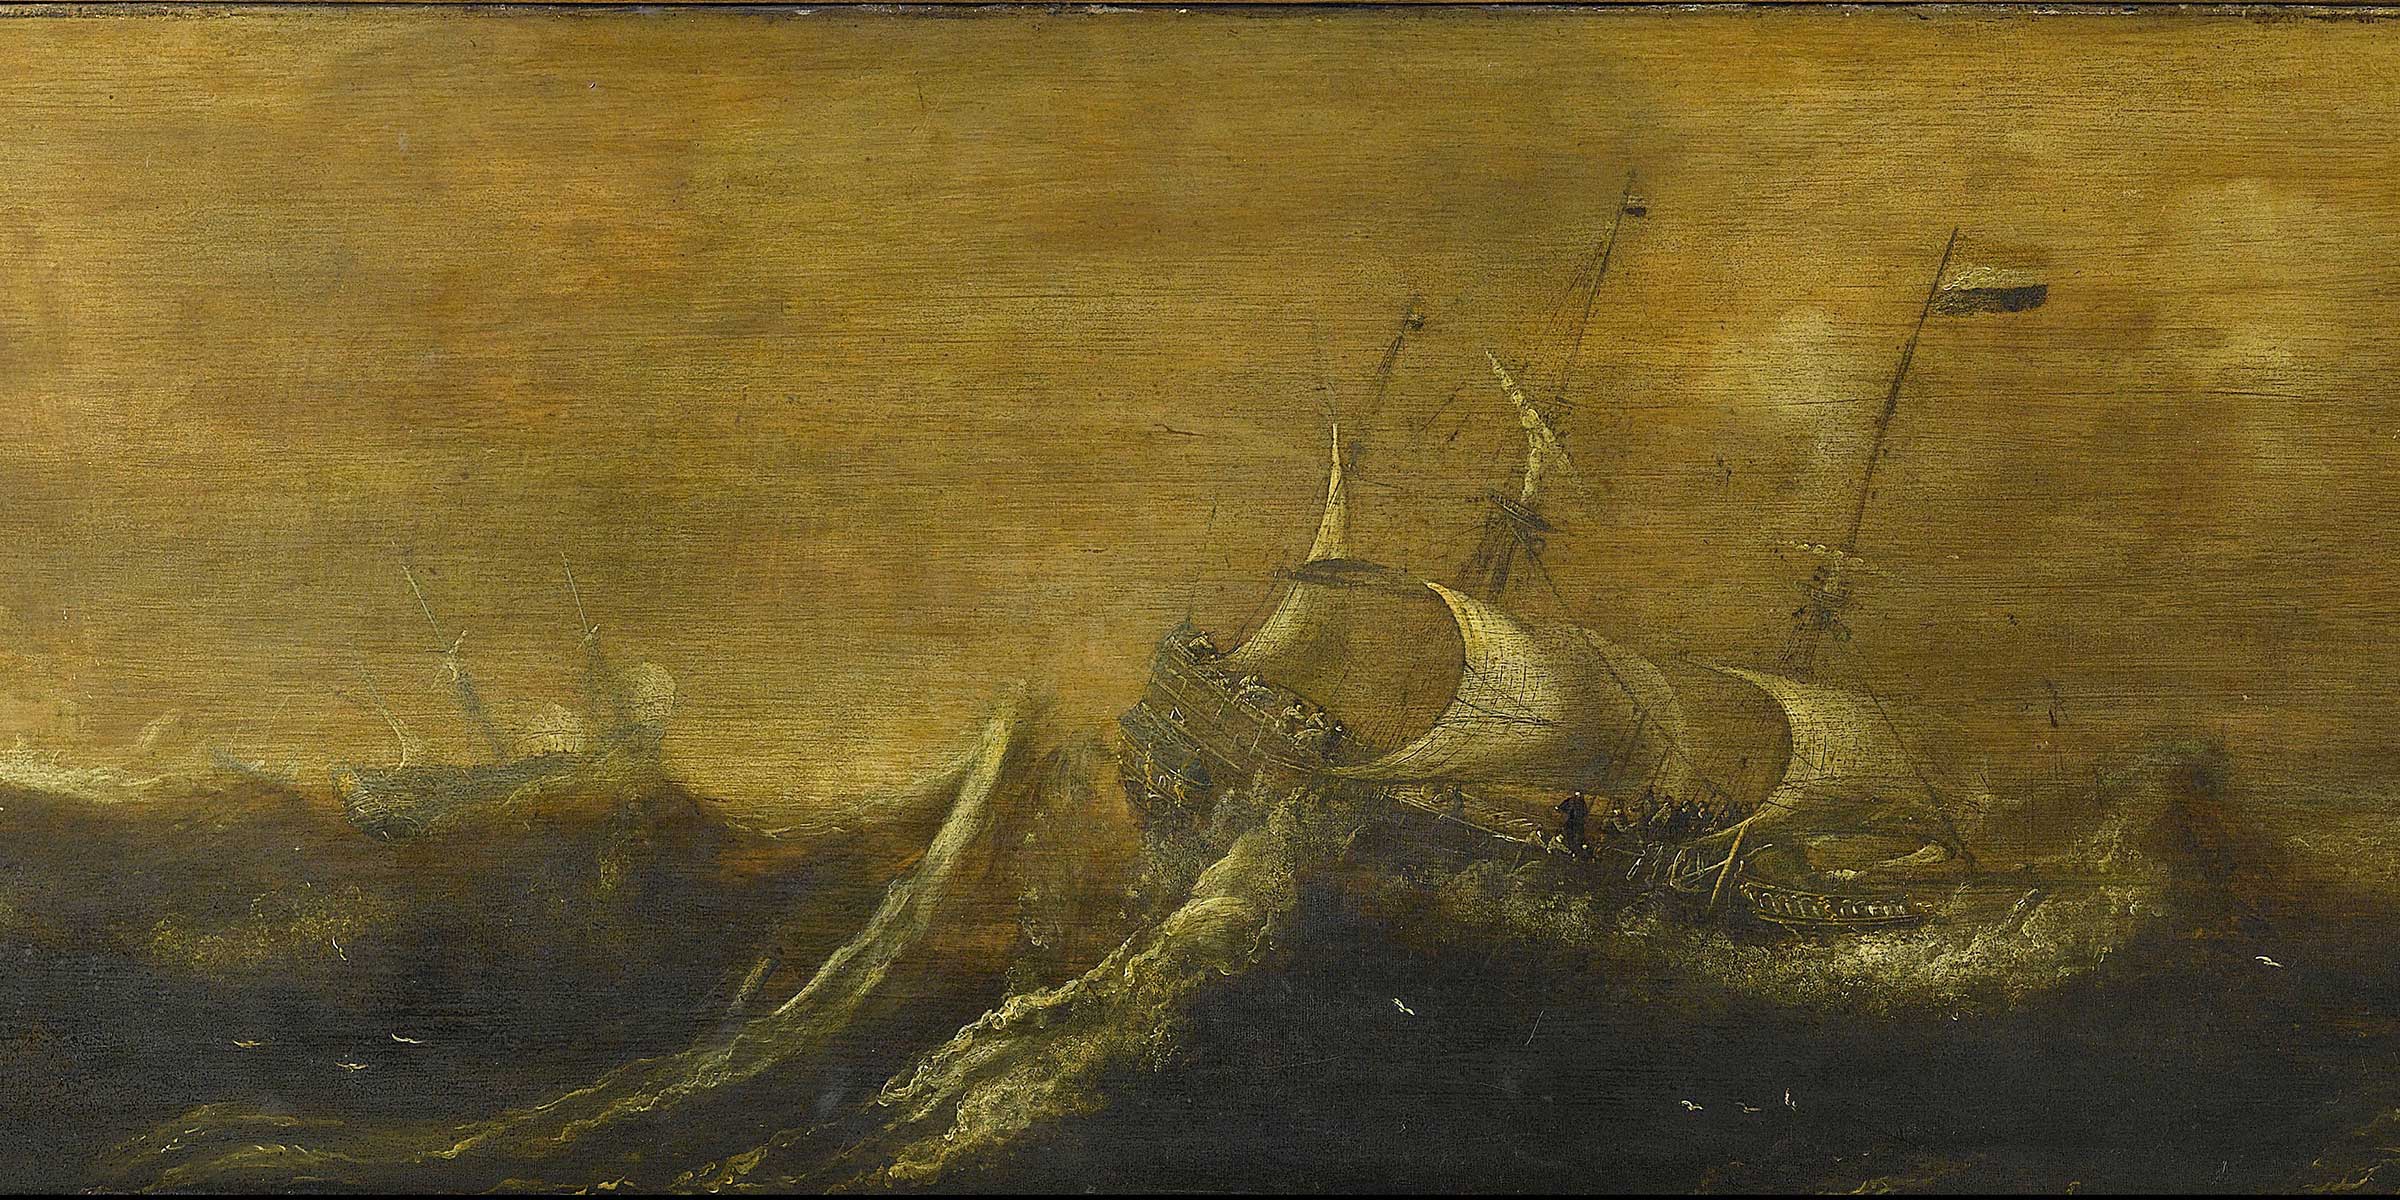 Painting of a ship tilted back by high waves against a gold sky